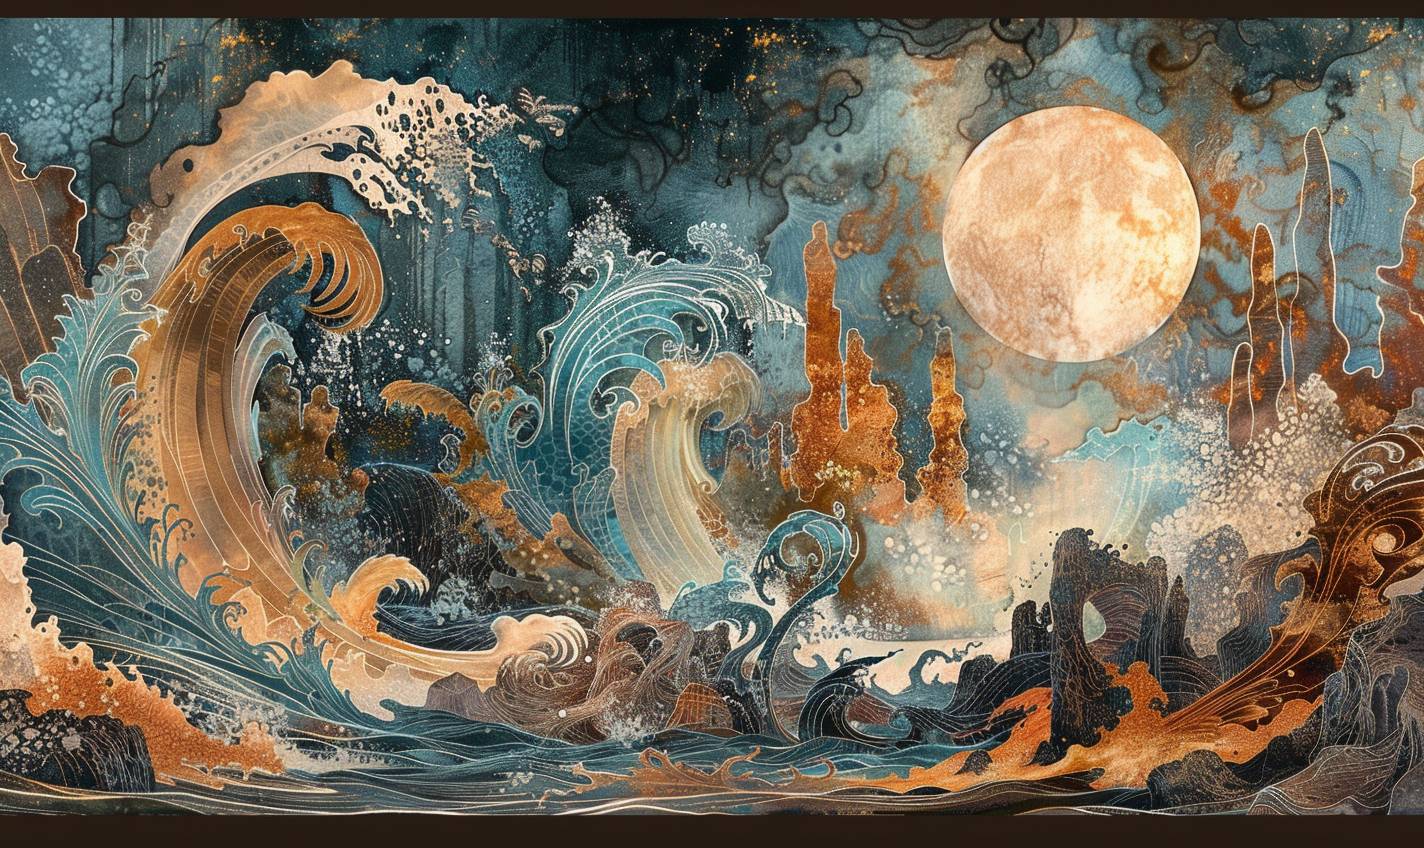 In the style of Kay Nielsen, spectral warriors clash in an ancient arena